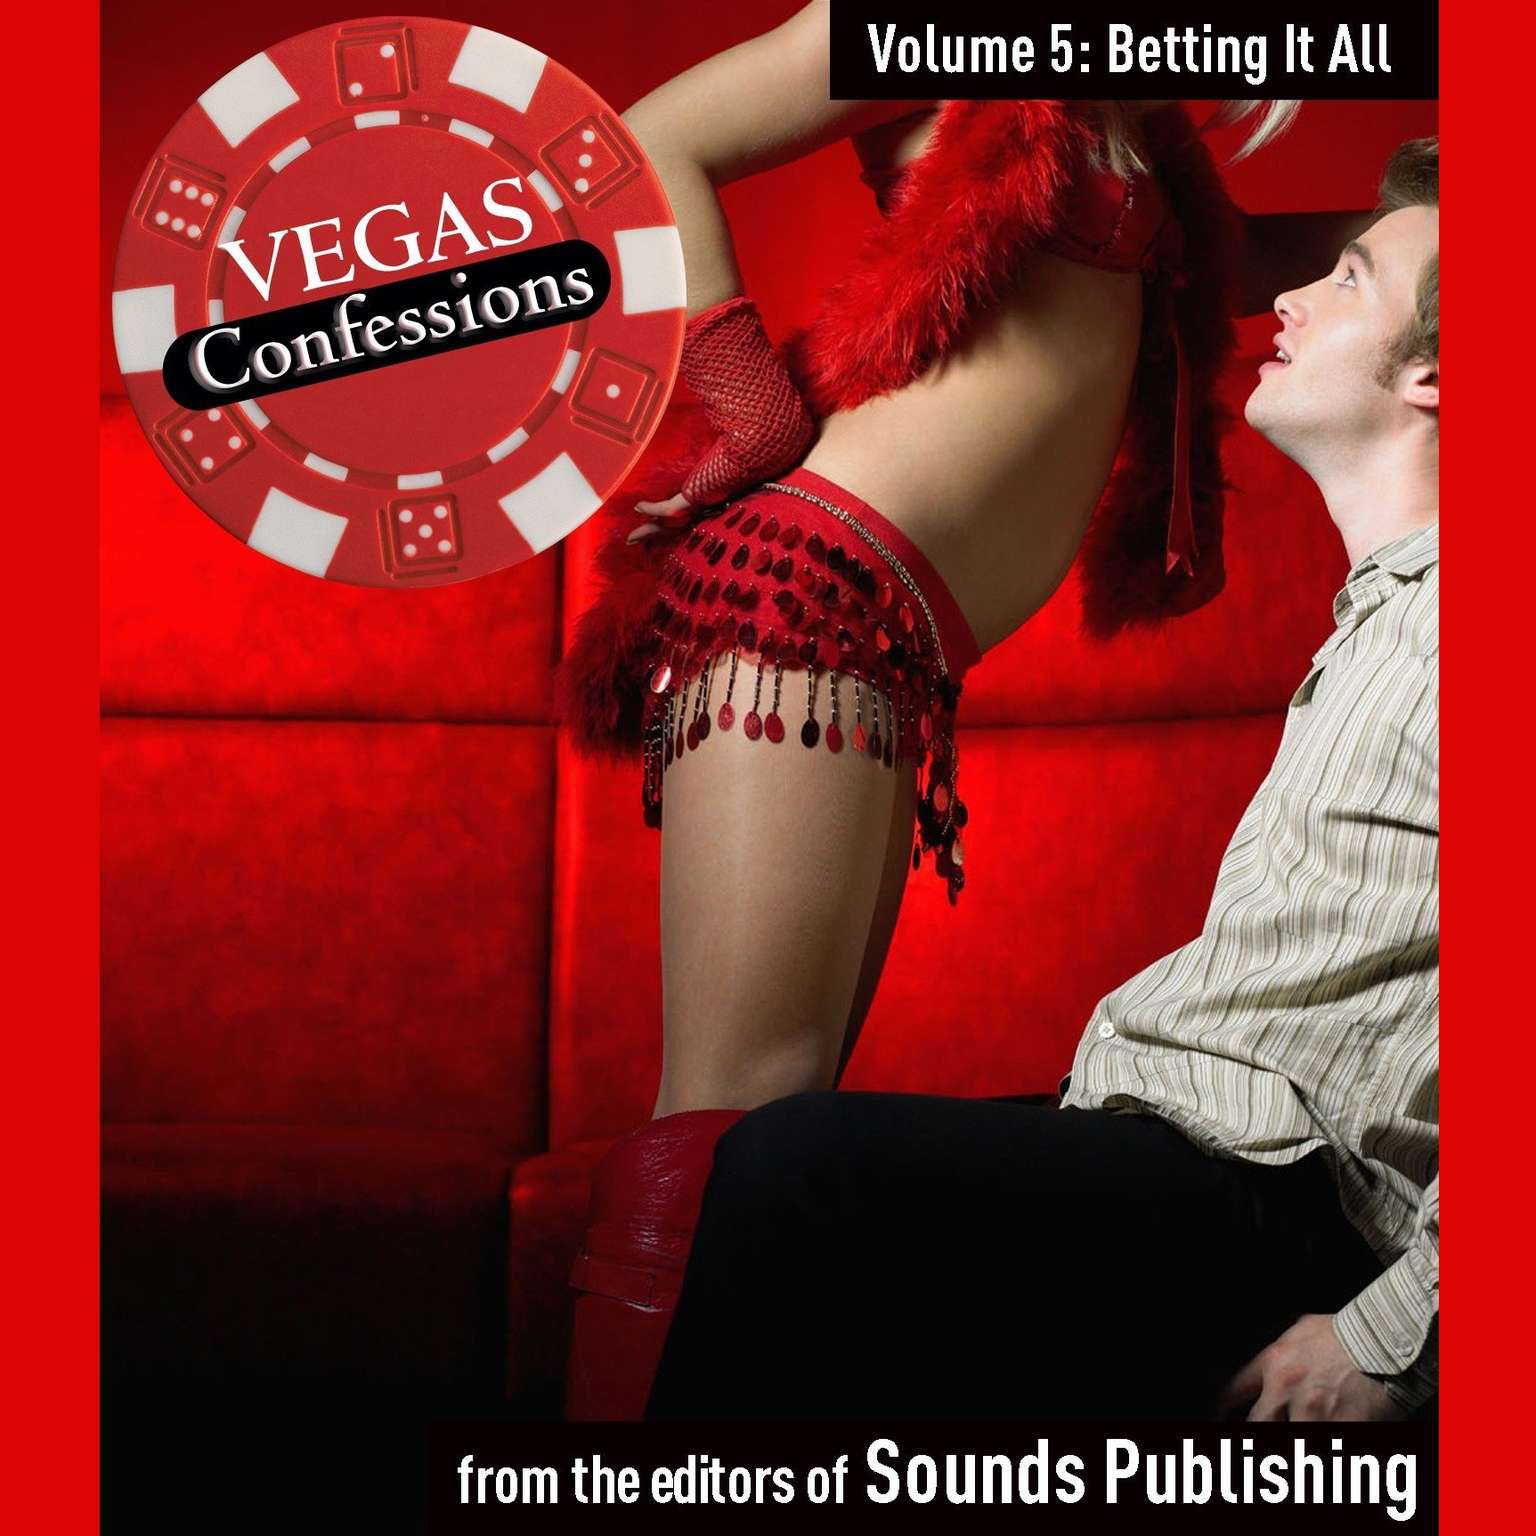 Vegas Confessions 5: Betting It All Audiobook, by The Editors of Sounds Publishing